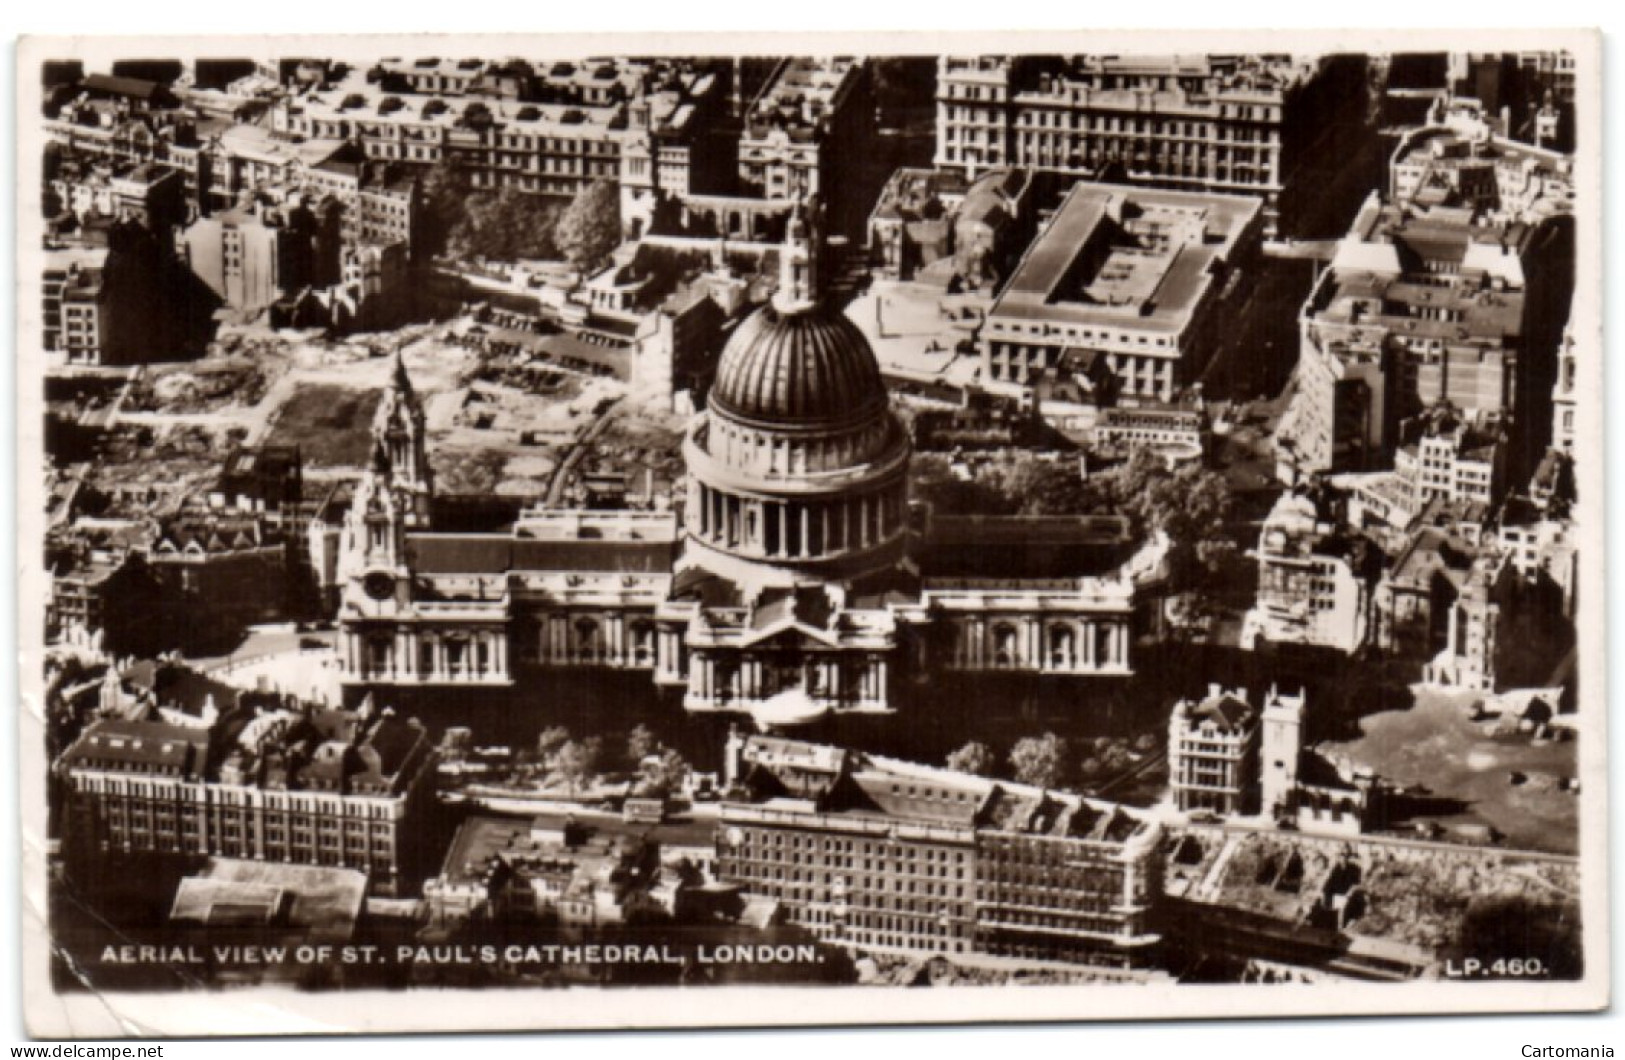 Aerial View Of St. Paul's Cathedral - London - St. Paul's Cathedral